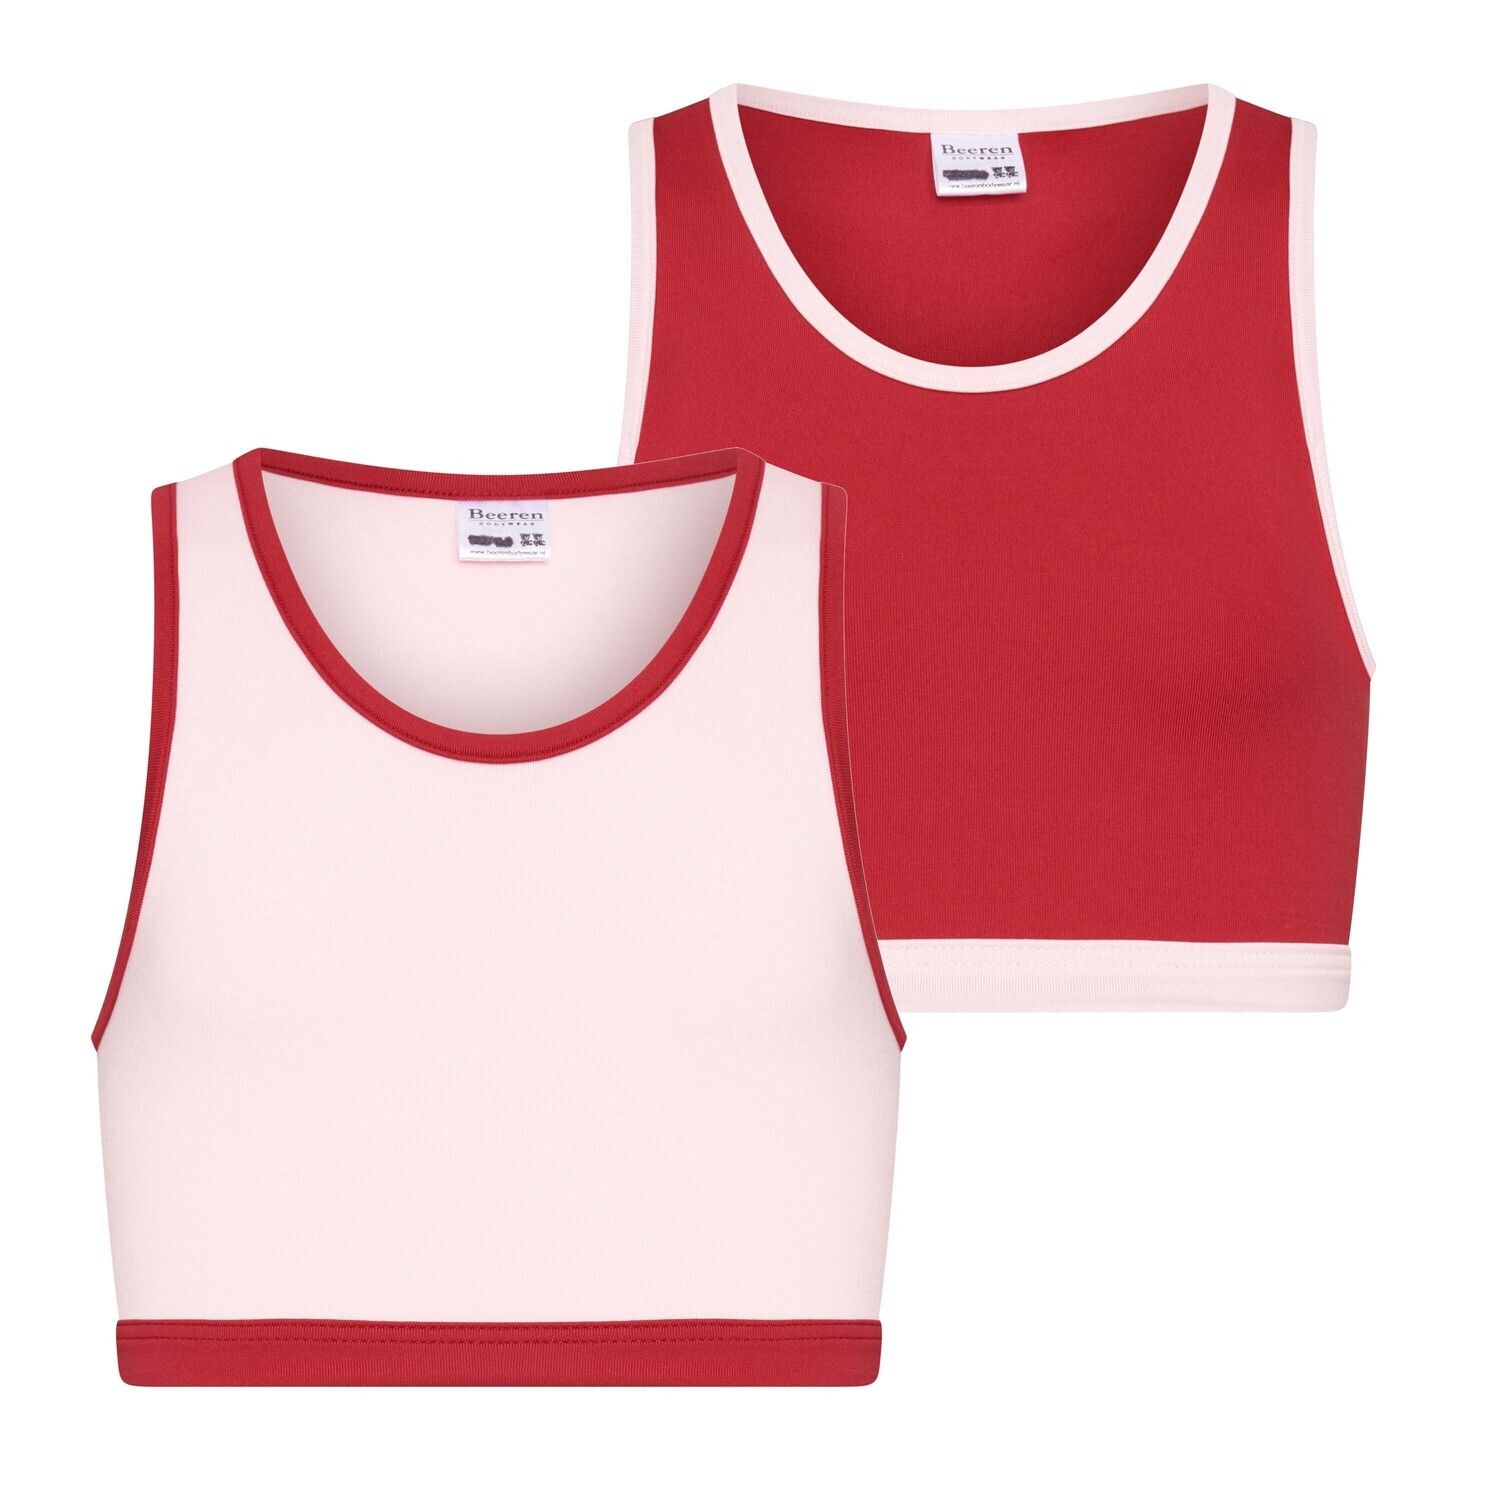 (08-251) Meisjes hesje Mix and Match 2-Pack rose/rood 170/176